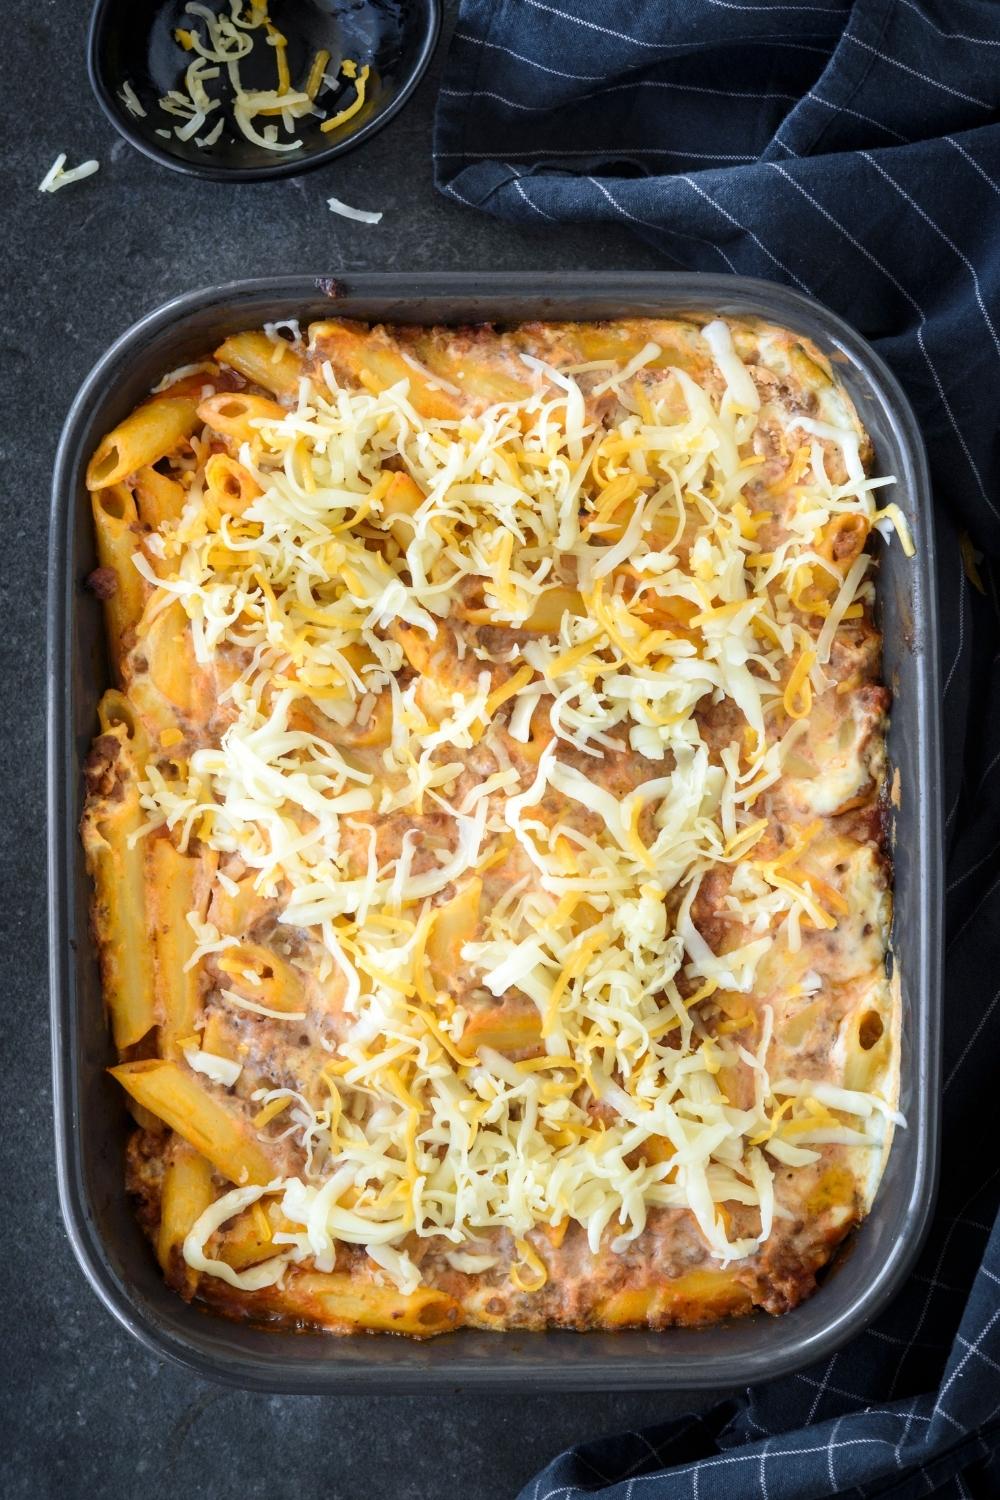 A casserole dish with baked casserole being topped with shredded cheese.